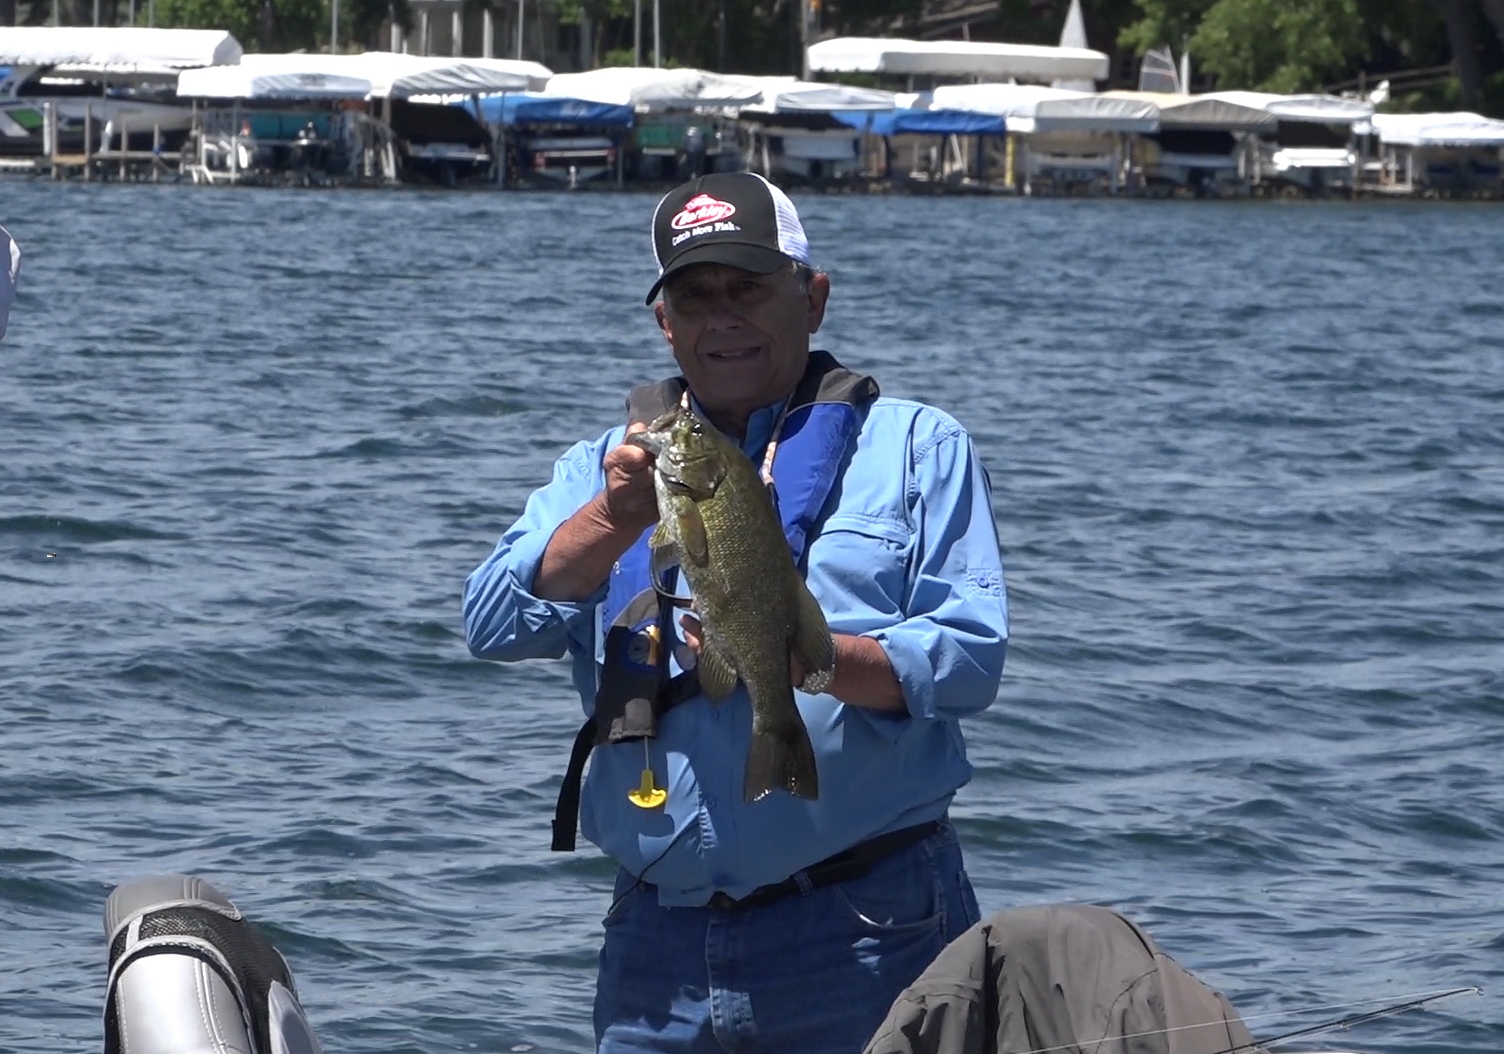 Iowa Great Lakes are a multi-species paradise   By Larry Myhre Team Outdoorsmen Adventures